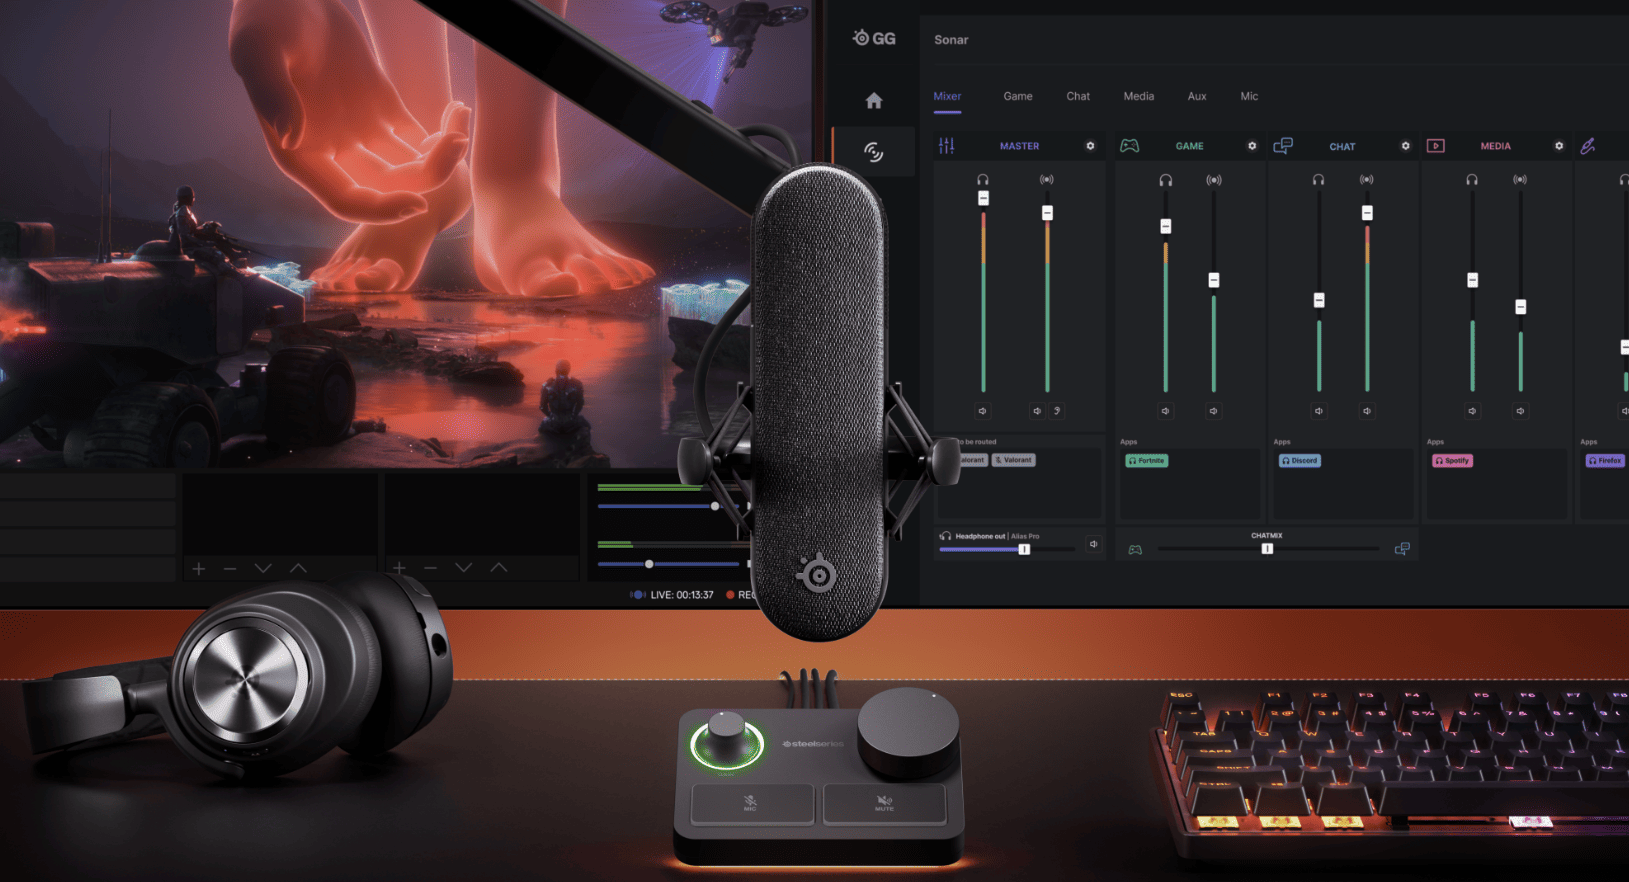 SteelSeries Revolutionises Gaming Audio With Alias Series Microphones Powered by Sonar Technology